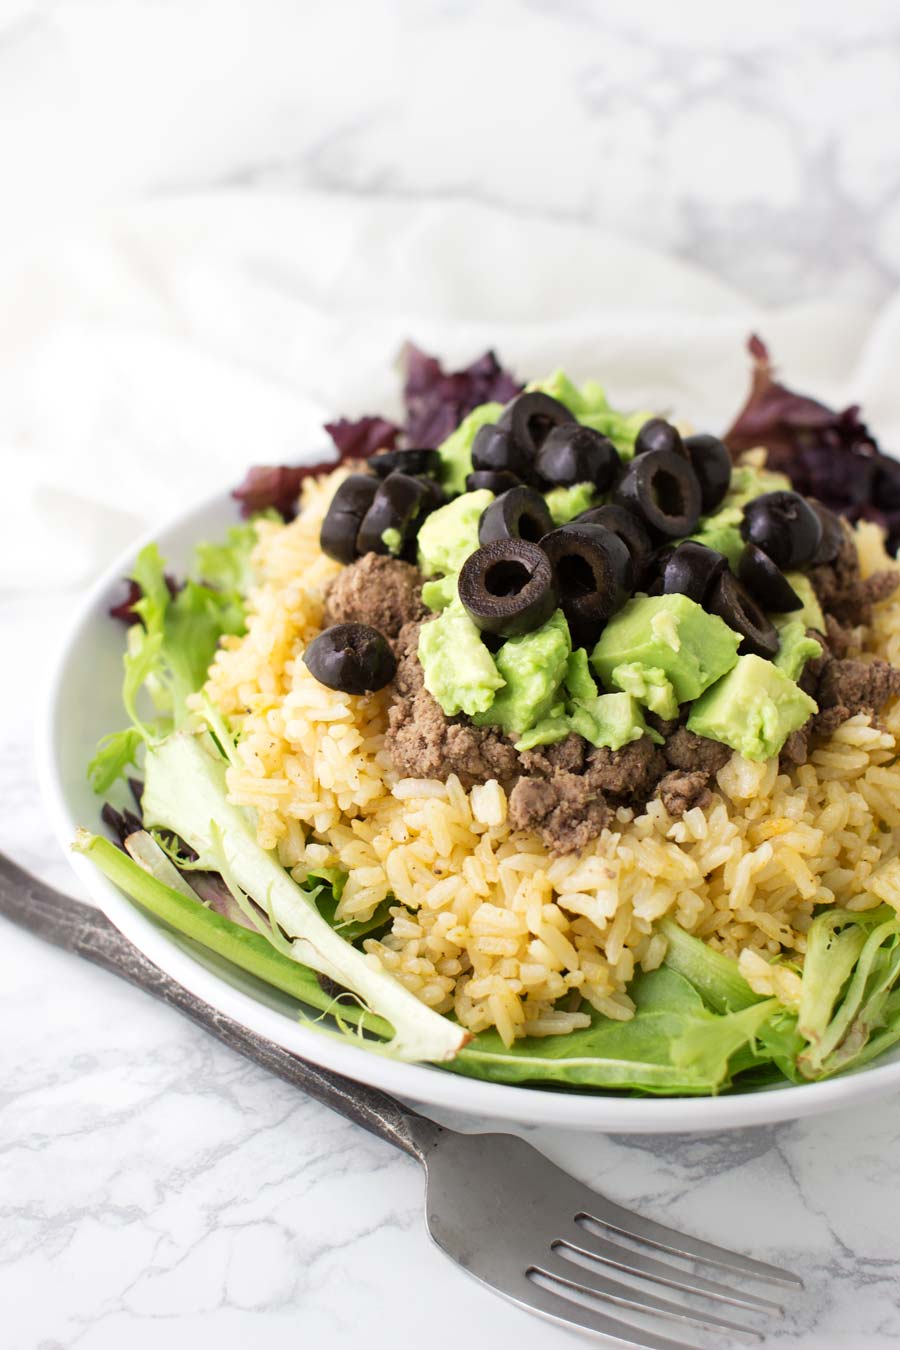 Taco Salad with Mexican Cauliflower Rice recipe from acleanplate.com #paleo #aip #glutenfree